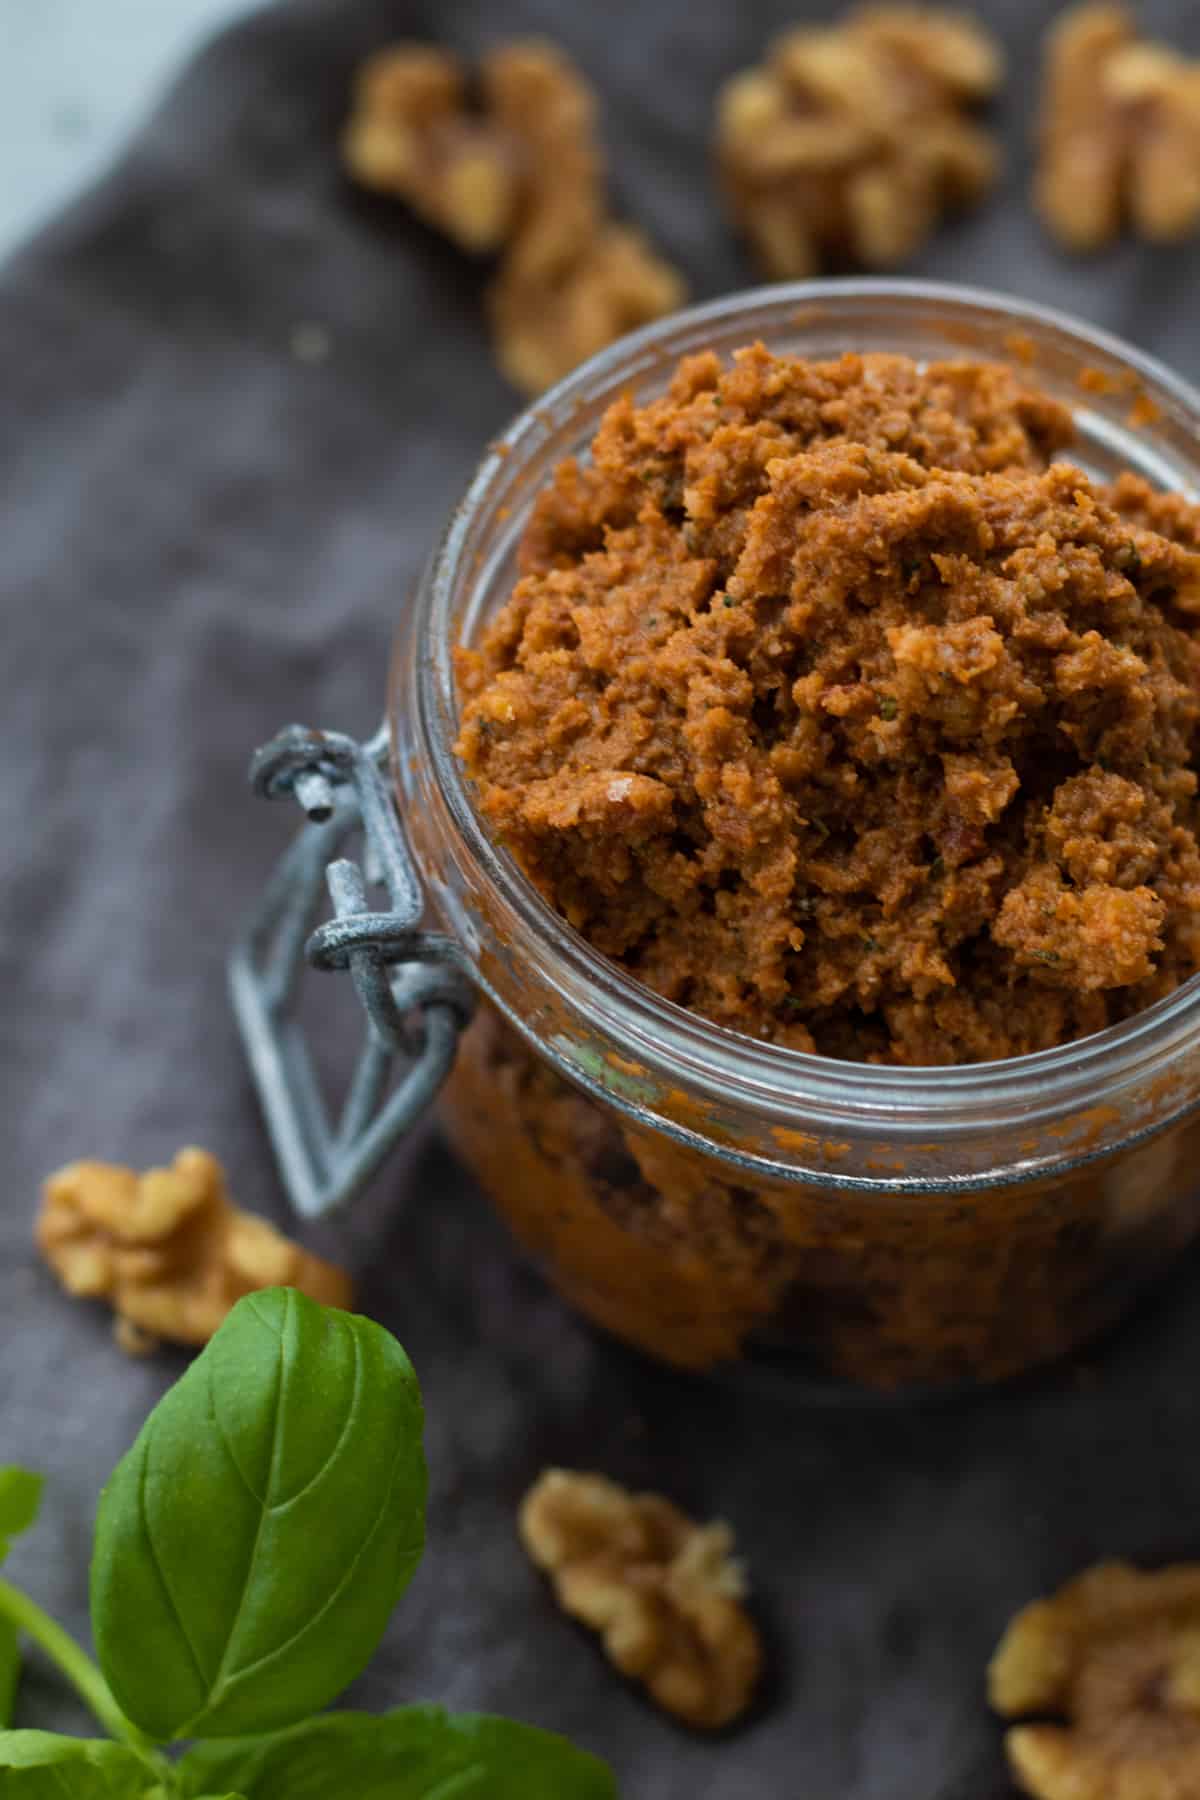 red pesto  in a jar with walnuts and basil around.